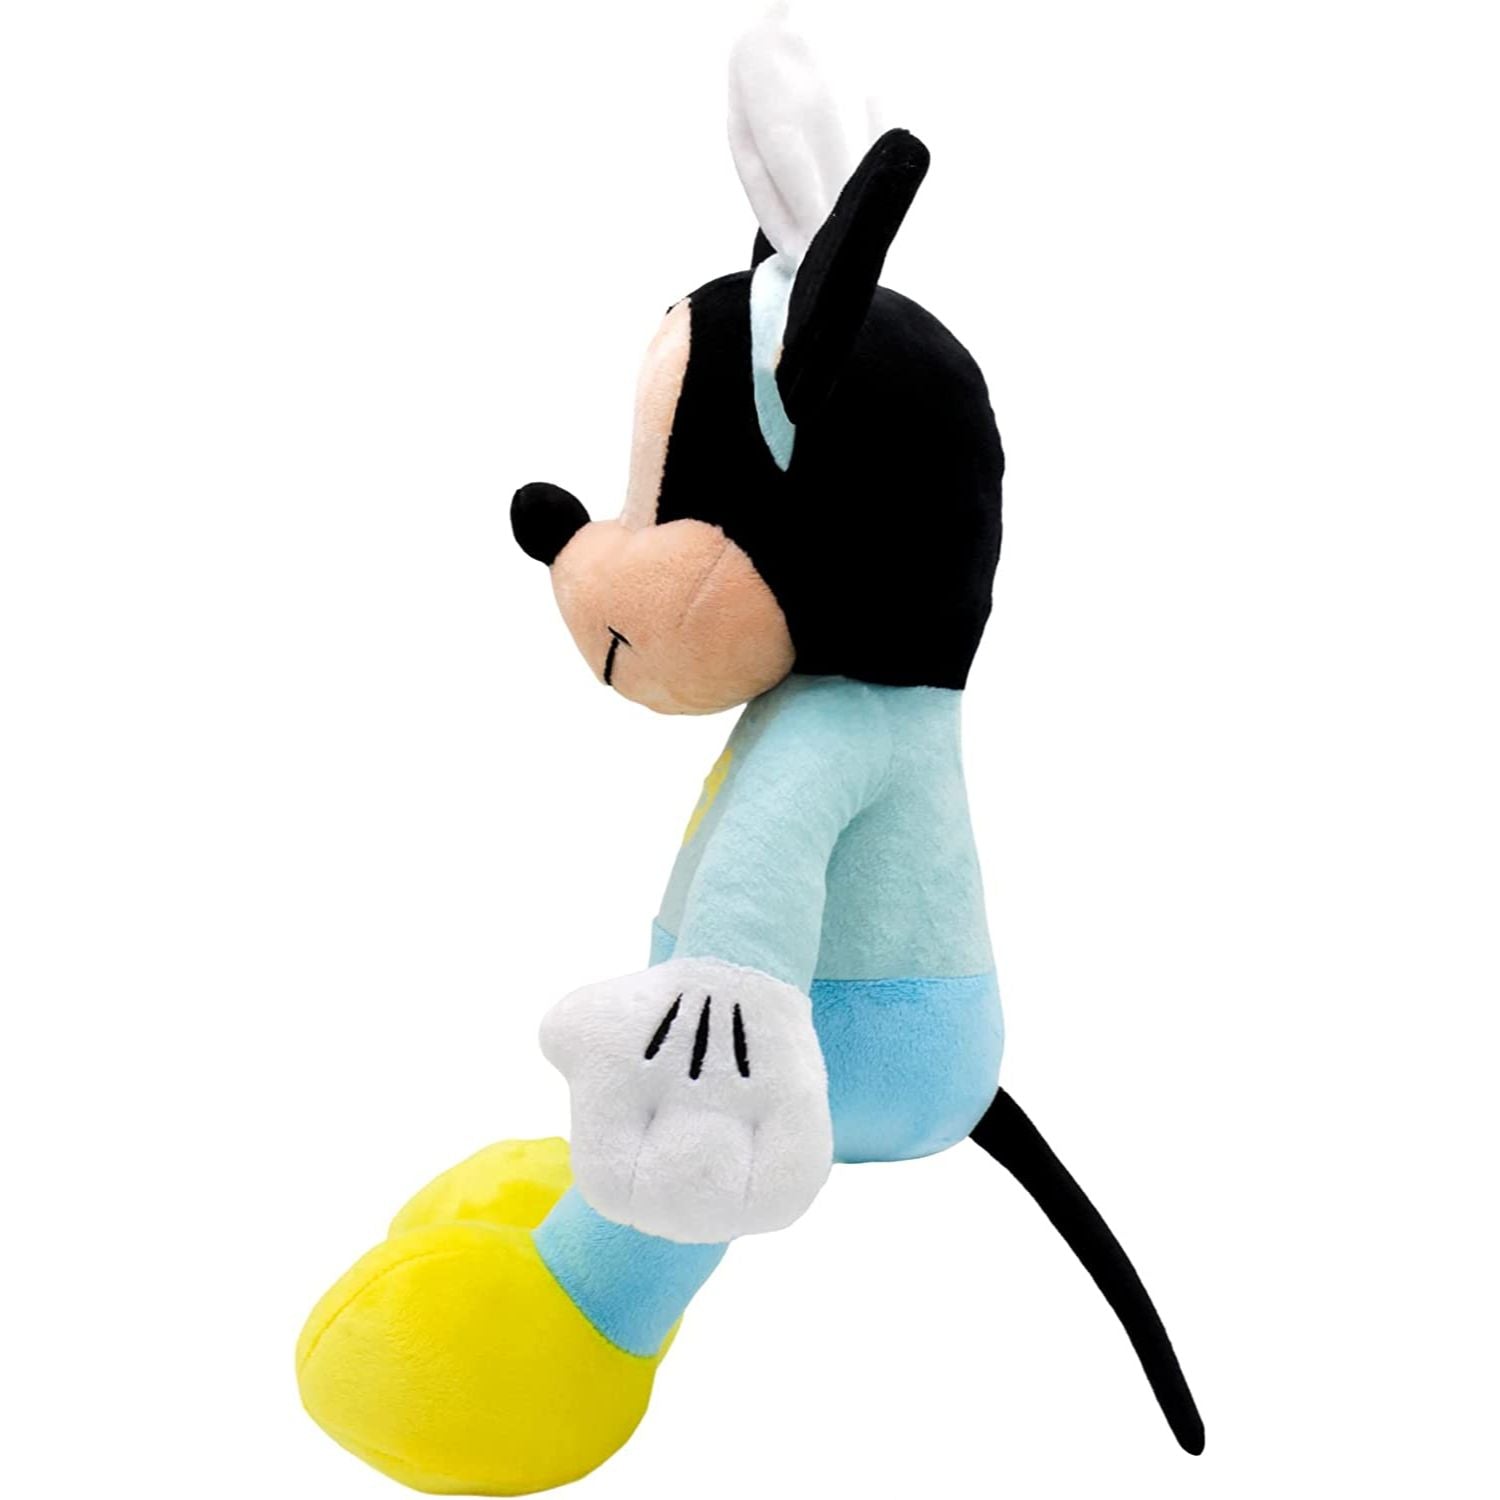 Disney - Mickey Mouse - Easter Holiday Plush - 15In - Heretoserveyou